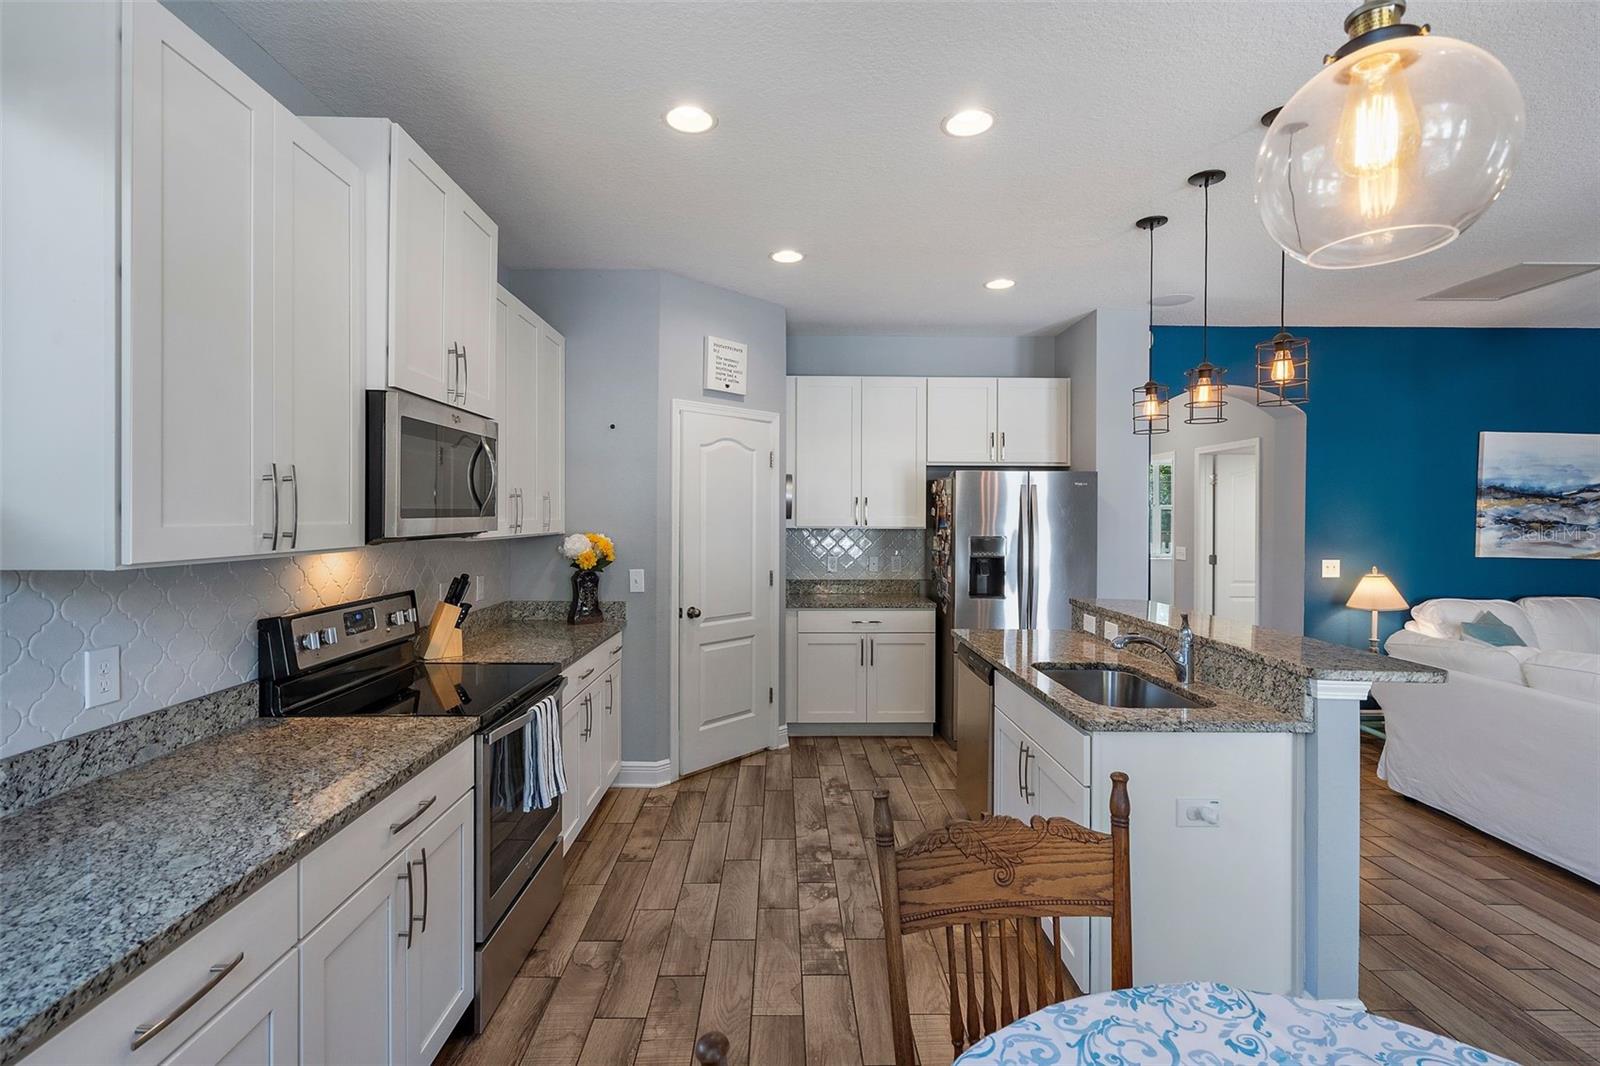 Kitchen has all the modern conveniences, plus an ideal open floor plan and center island.